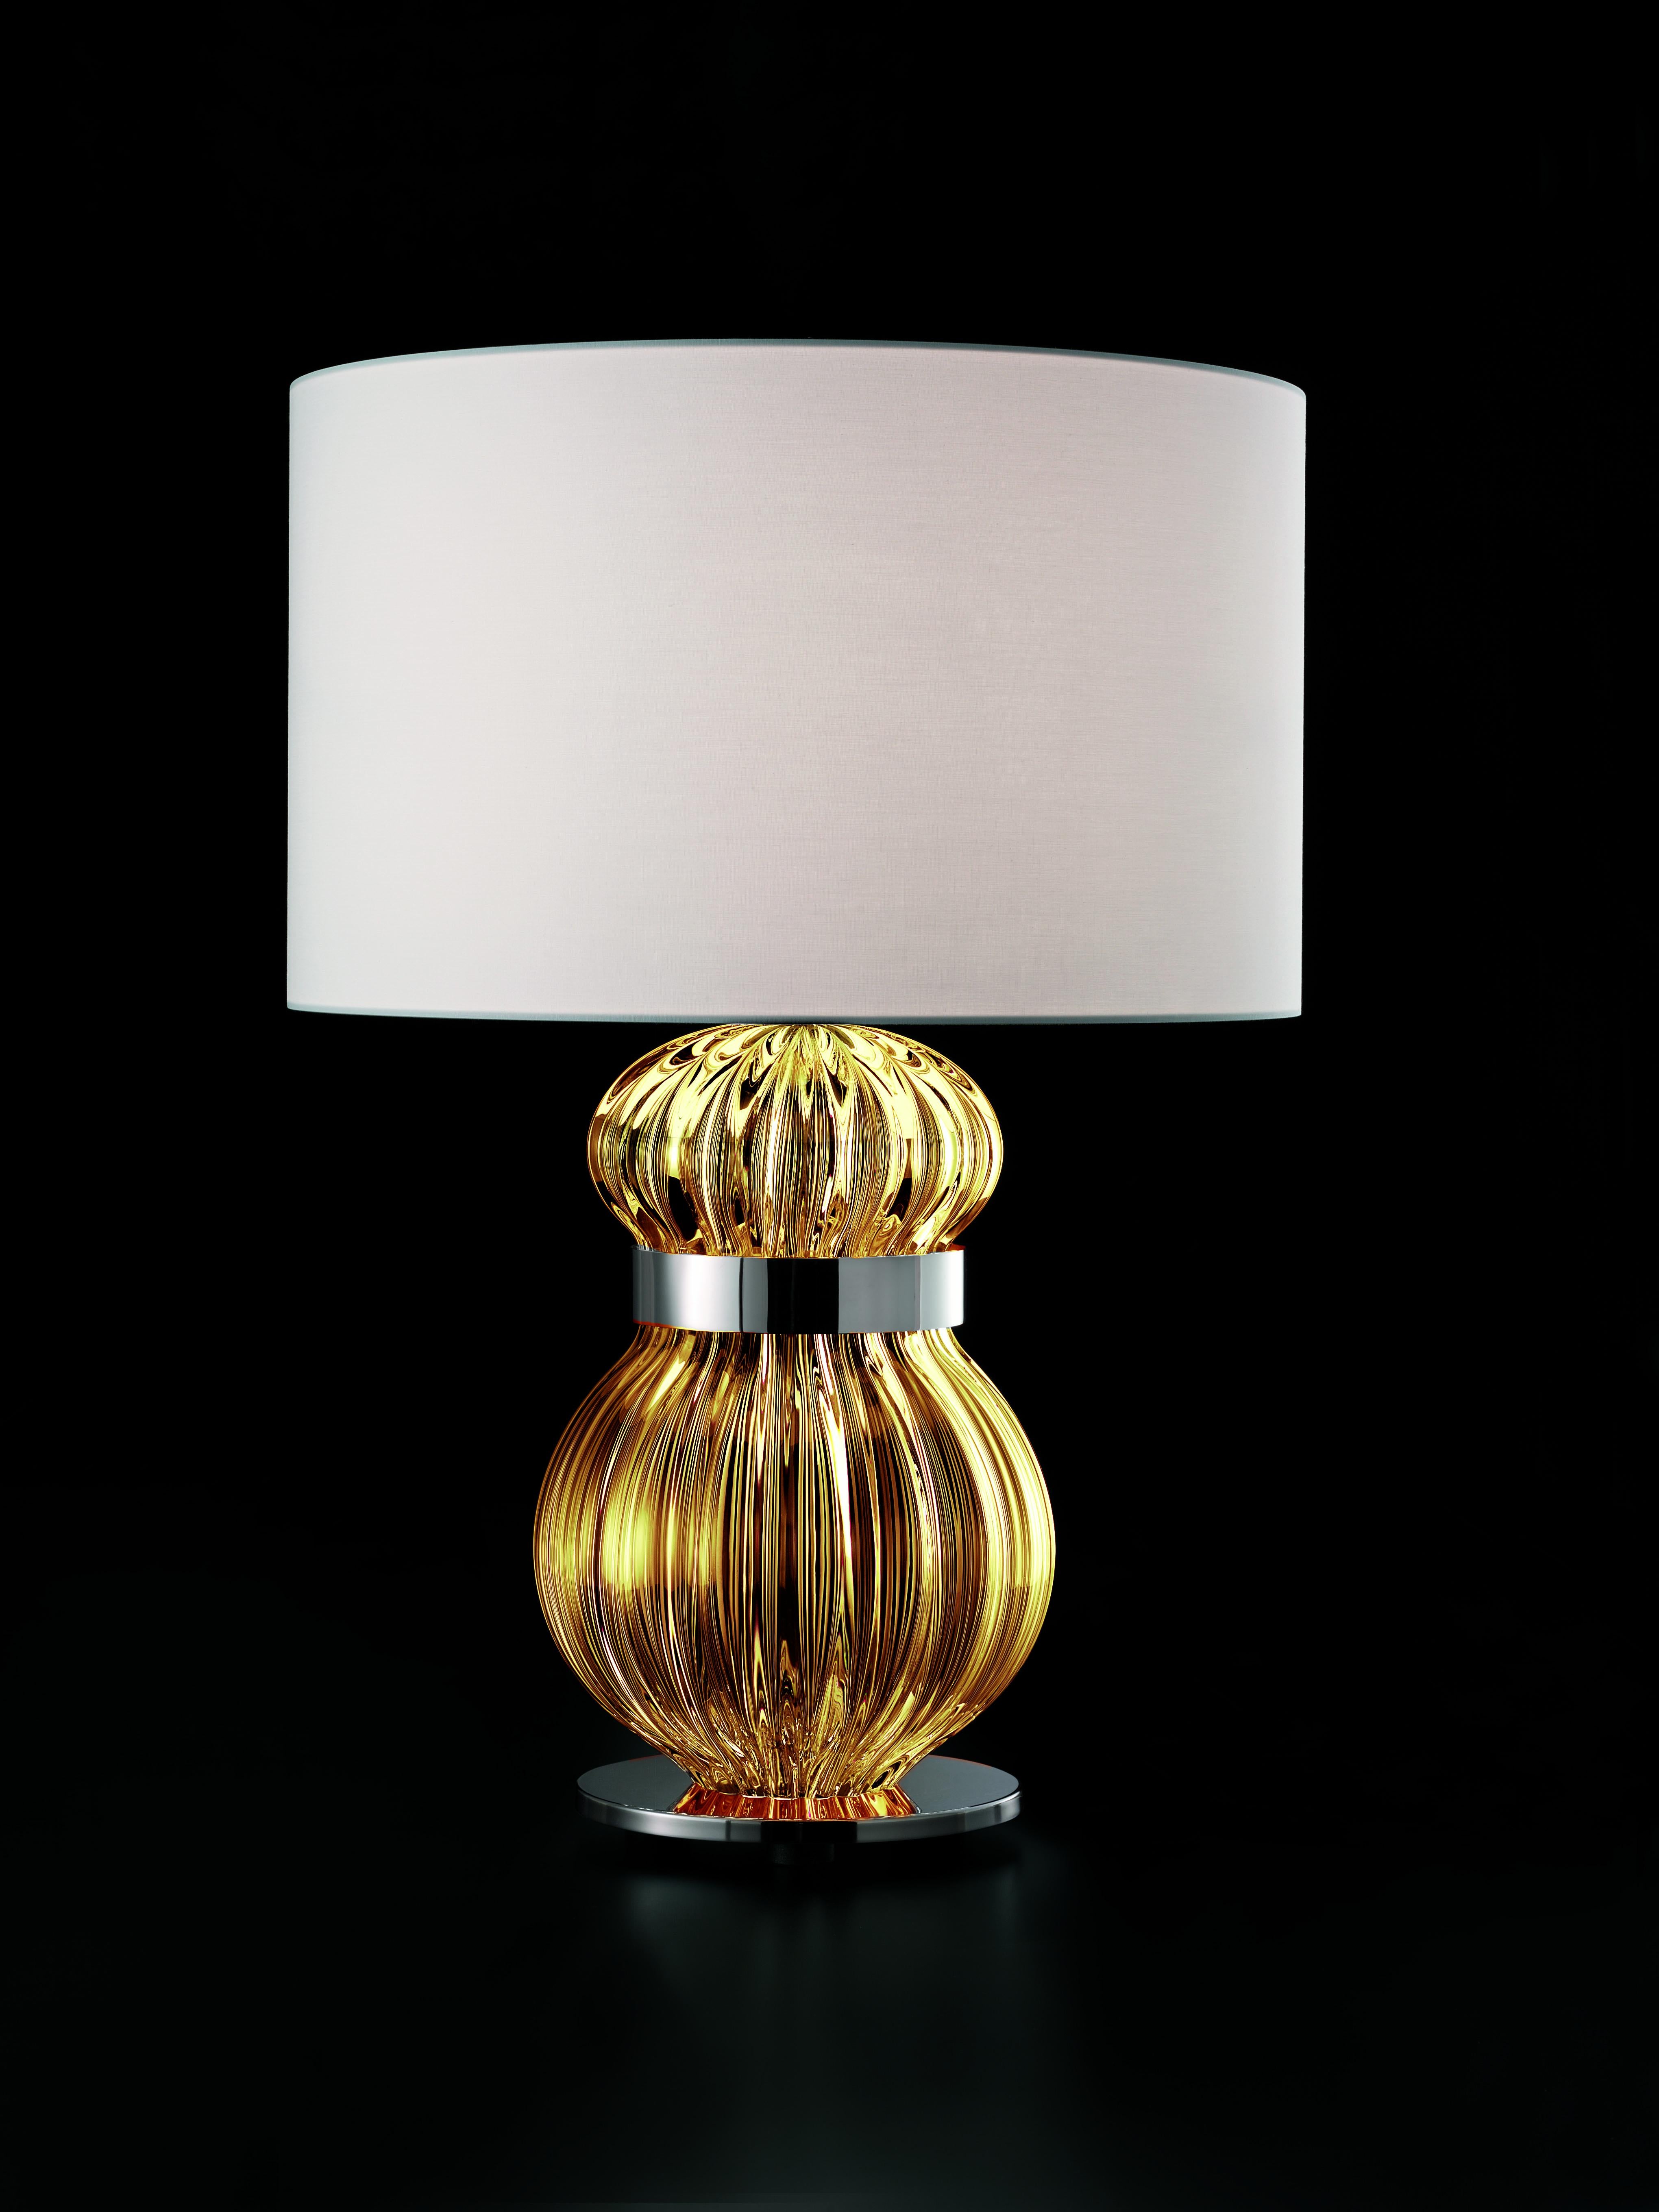 Orange (Caramel_CA) Medina 5686 Table Lamp in Glass with White Shade by, Barovier&Toso 2